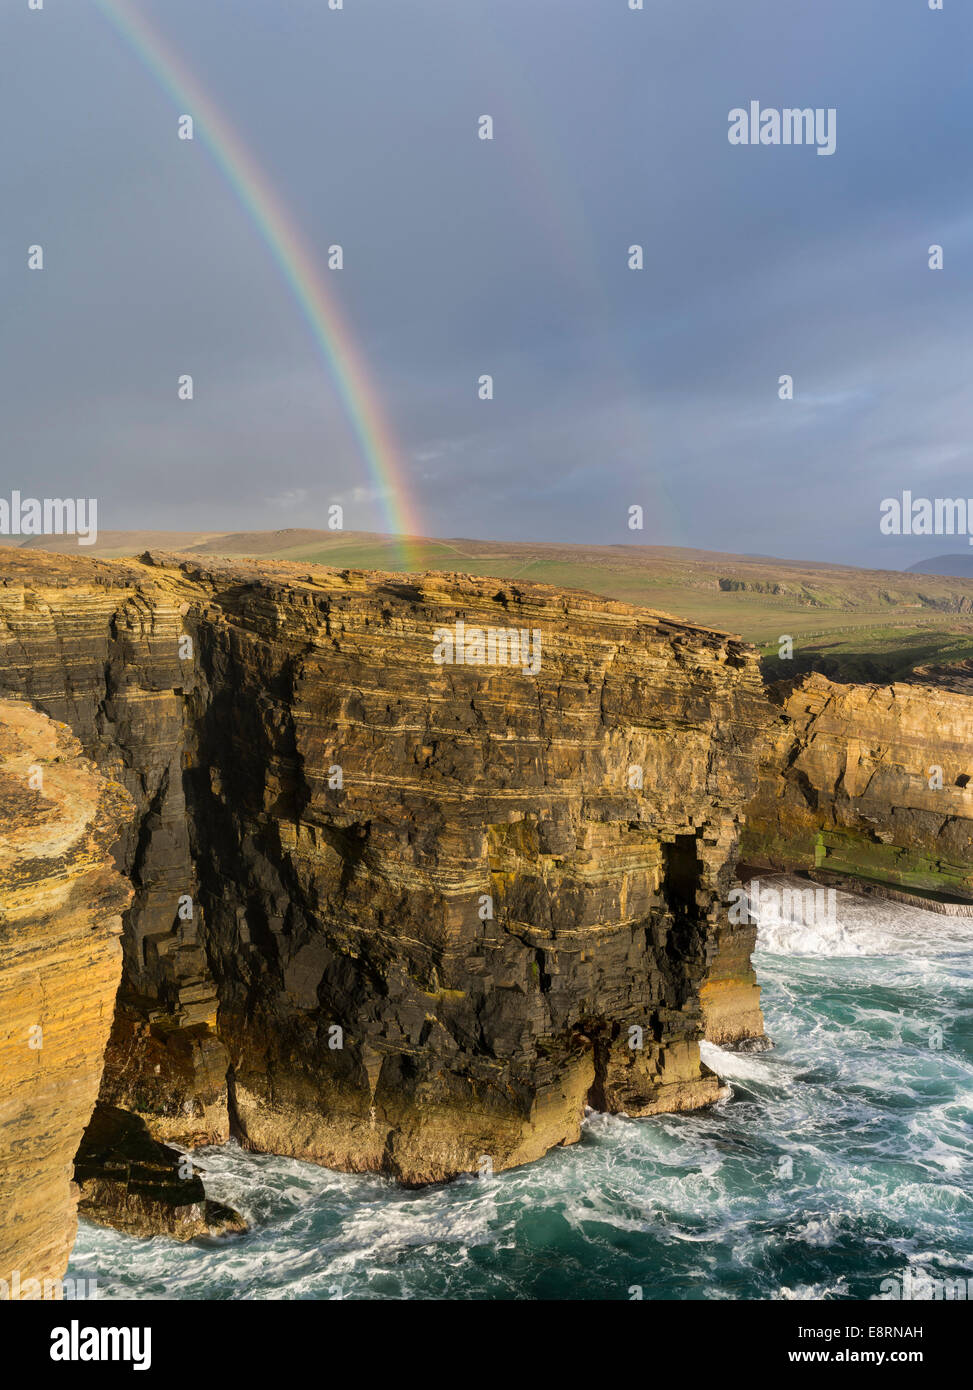 The Cliffs of Yesnaby in Orkney, during stormy weather and sunset, Orkney islands, Scotland. Stock Photo